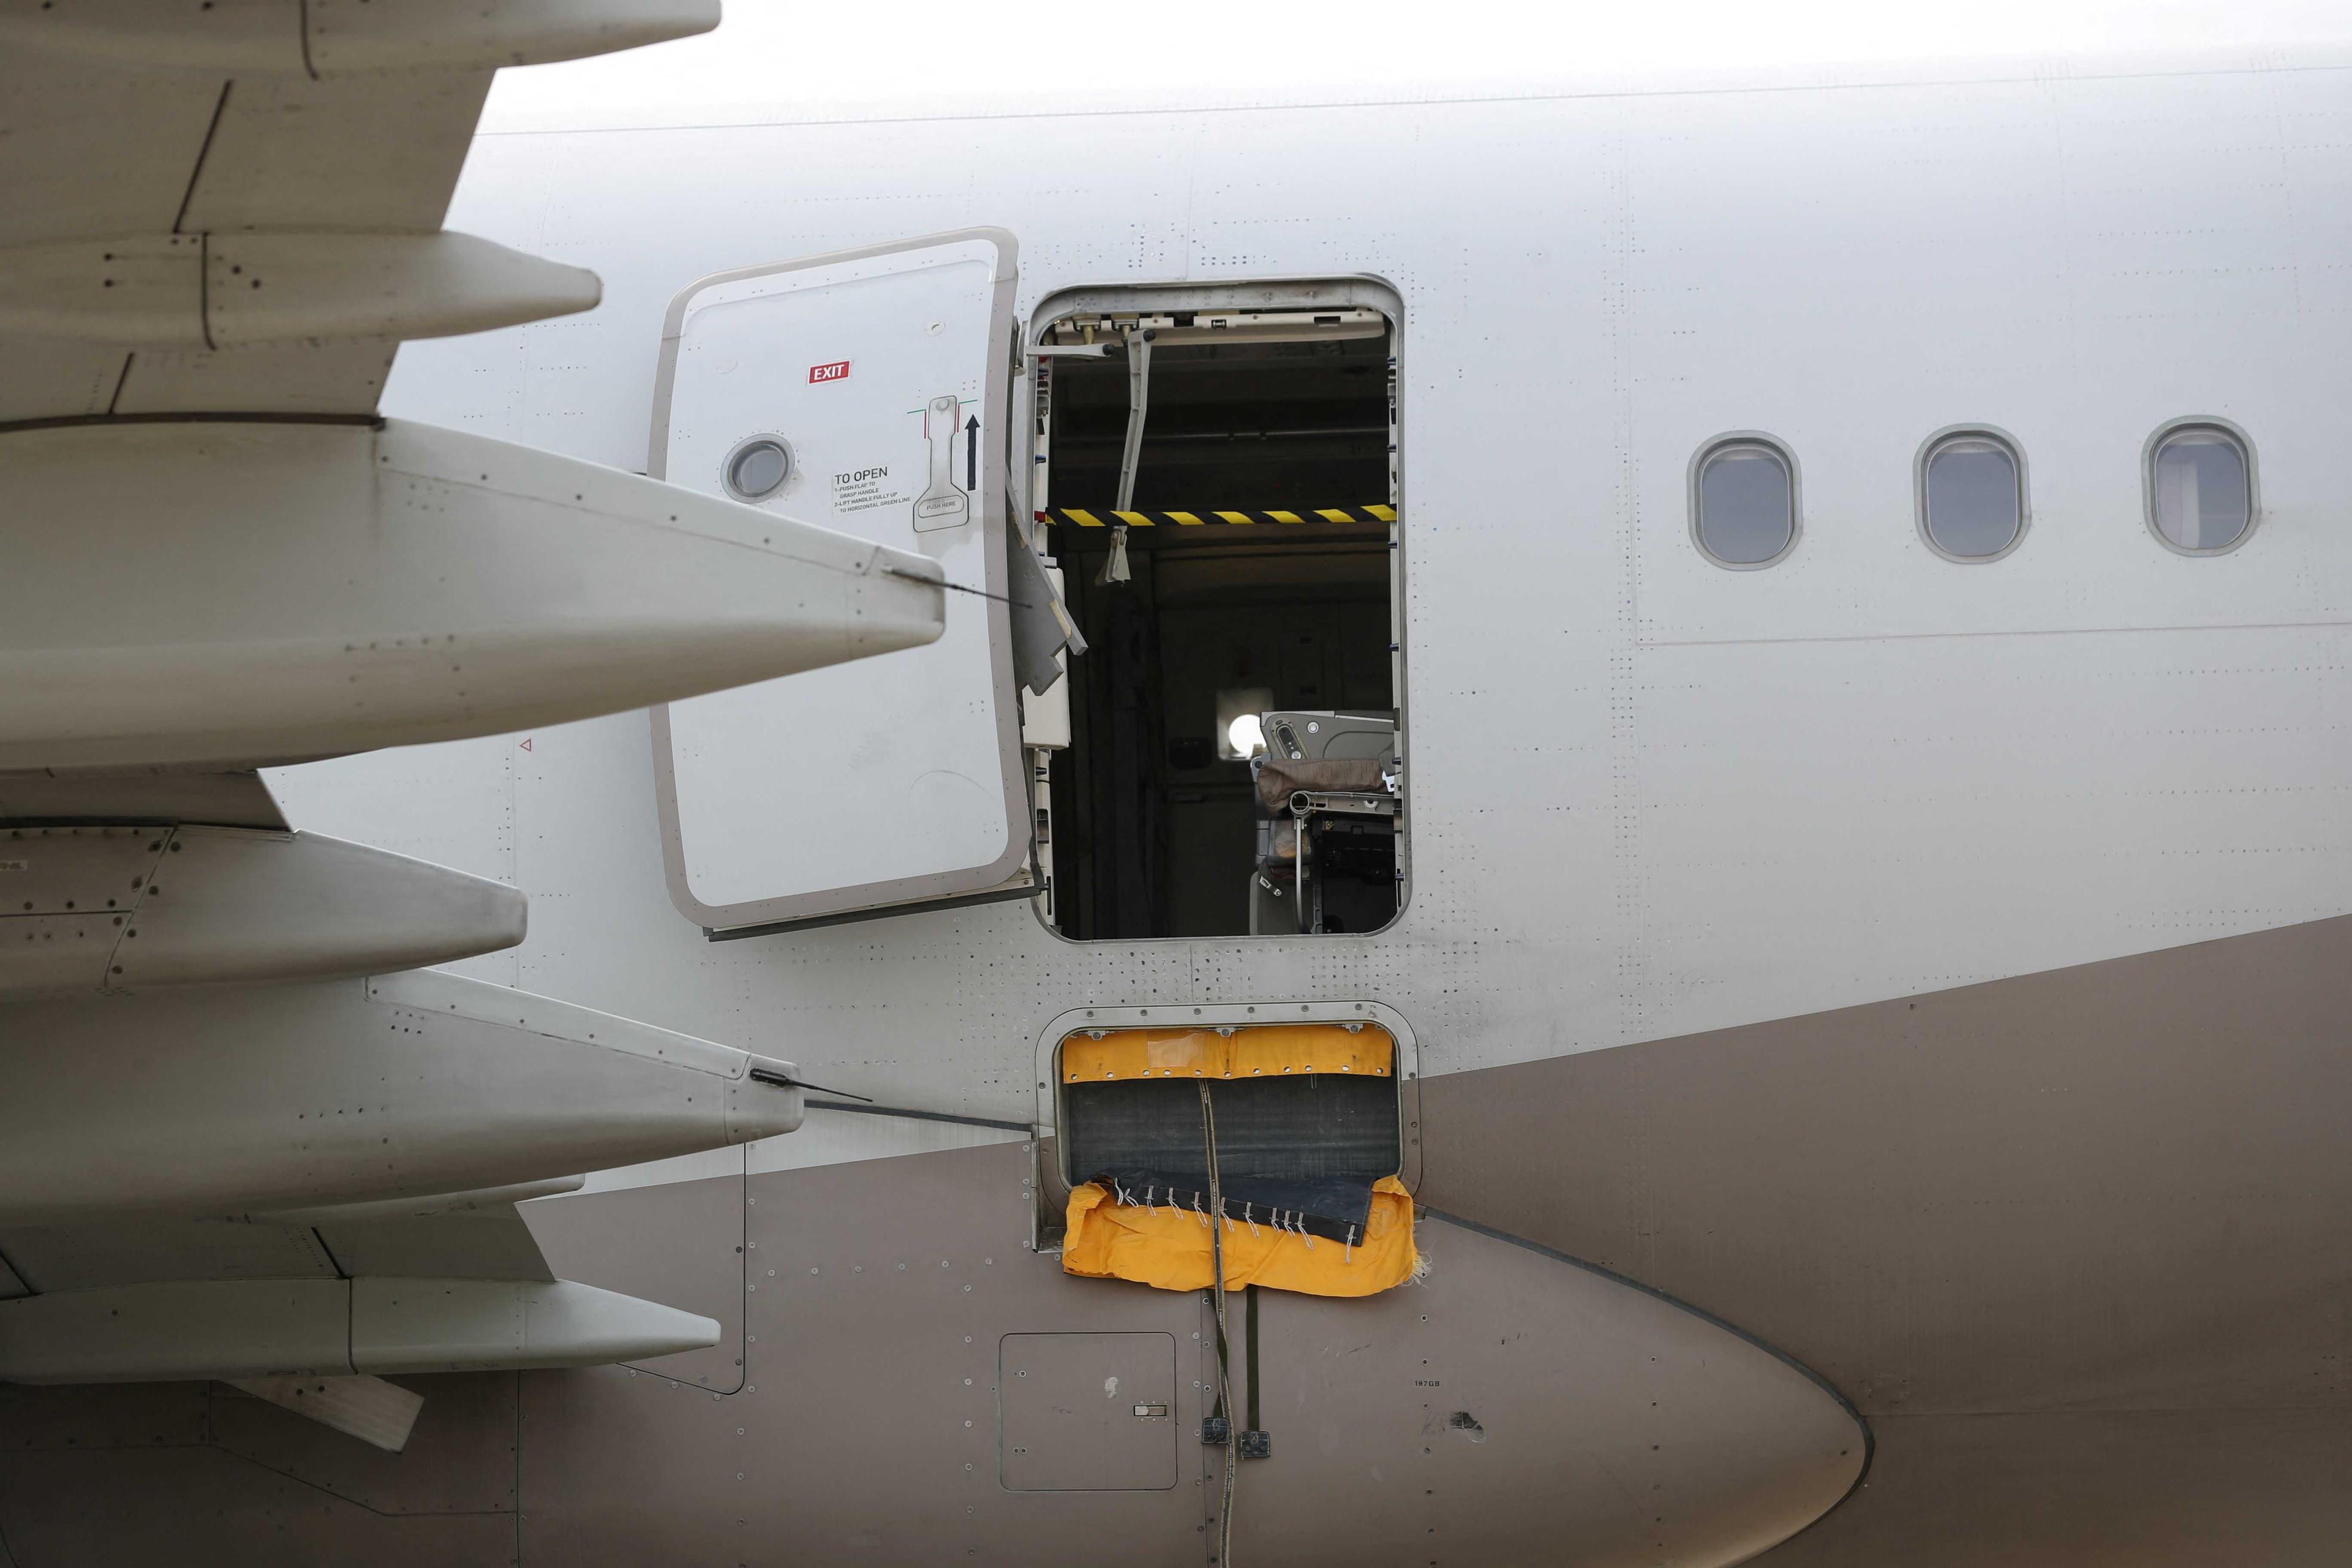 Asiana Airlines' Airbus A321 plane, of which a passenger opened a door on a flight shortly before the aircraft landed, is pictured at an airport in Daegu, South Korea May 26. Photo: Reuters